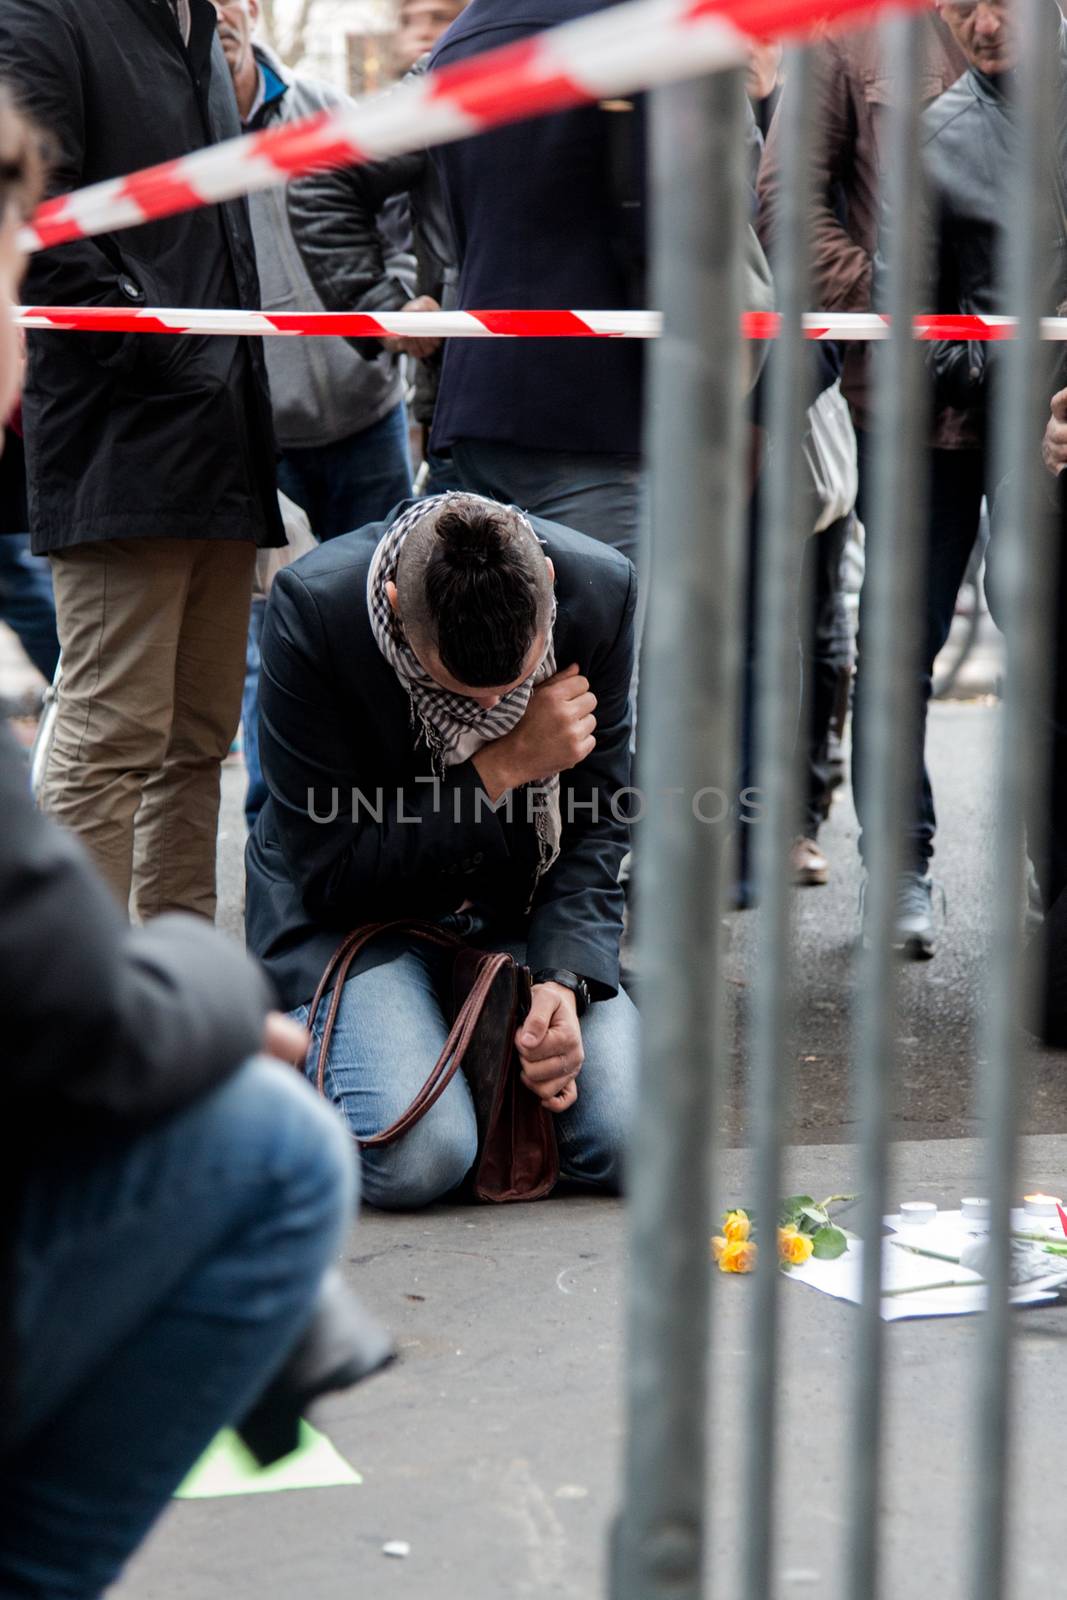 FRANCE, Paris: Large crowds leave flowers and other tributes outside the La Casa Nostra pizzeria, the scene of one of several deadly terror attacks in Paris, as part of a citywide outpouring of grief on November 14, 2015. At least 129 people were killed in a series of shootings and explosions carried out the night before by the Islamic State group. 